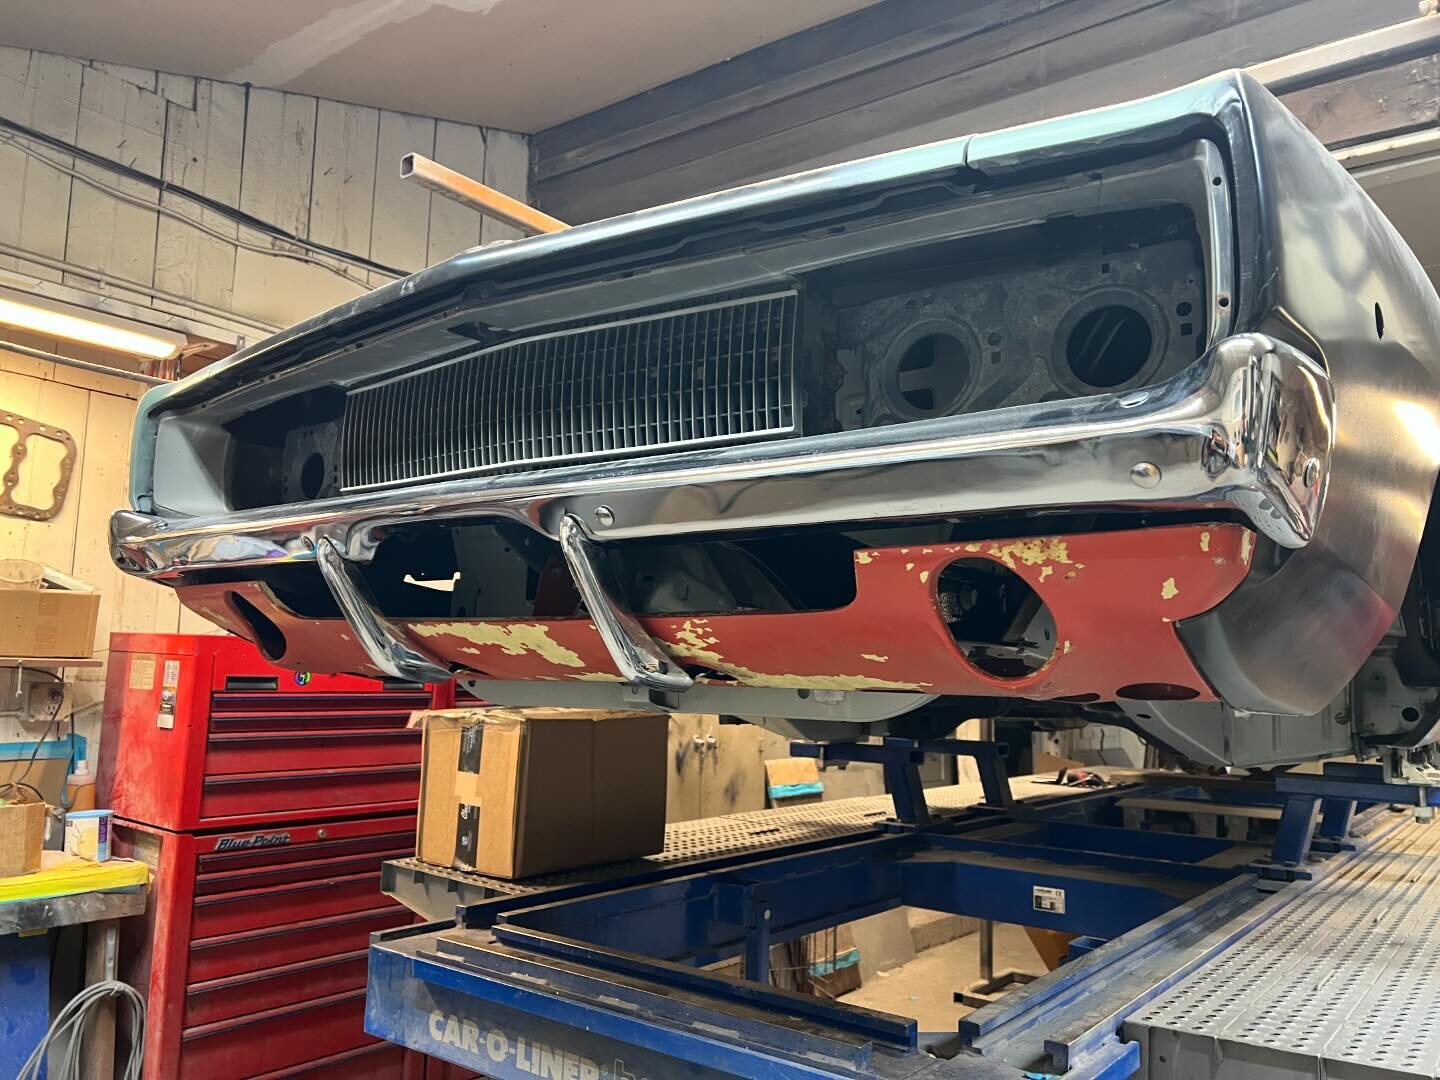 1968 Dodge Charger RT front bumper assembly mocked up for proper fitting. Fuel tank mocked up for mounting brackets to be welded to new trunk pan.#longvalleyautobody #1968dodgechargerrt